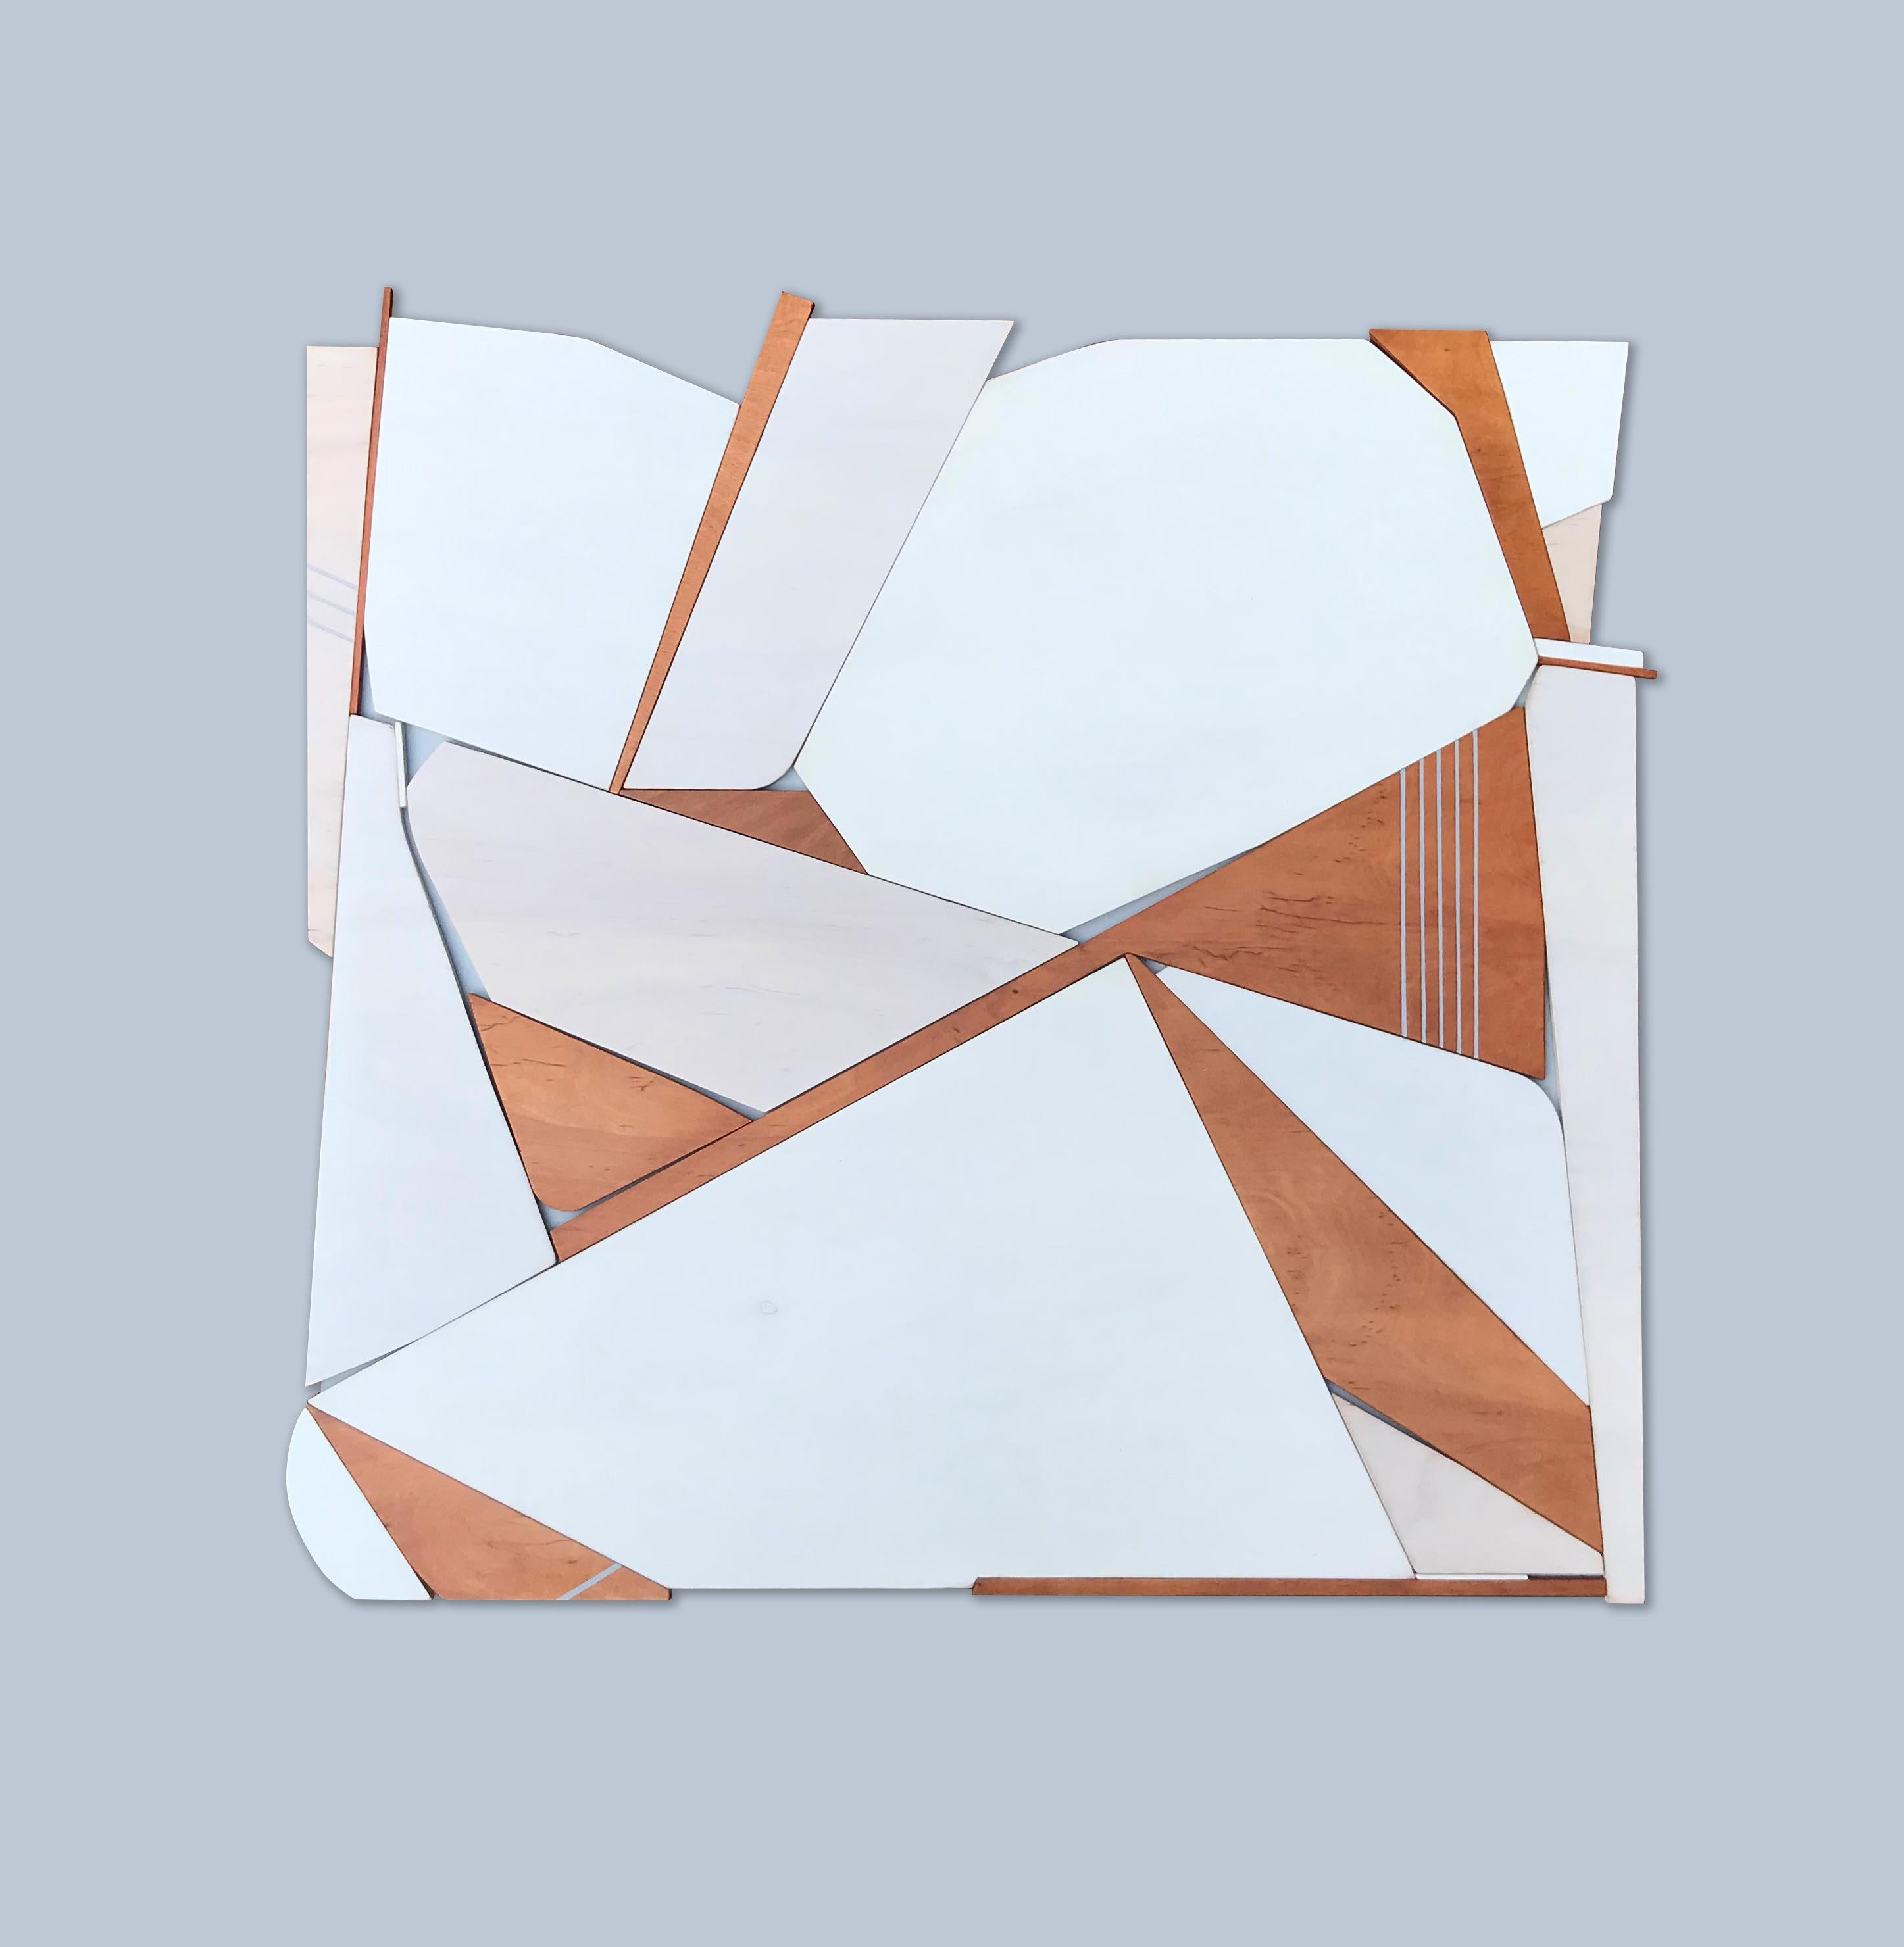 Sparrow (white modern wood wall sculpture, off-white, abstract geometric art) - Brown Abstract Sculpture by Scott Troxel